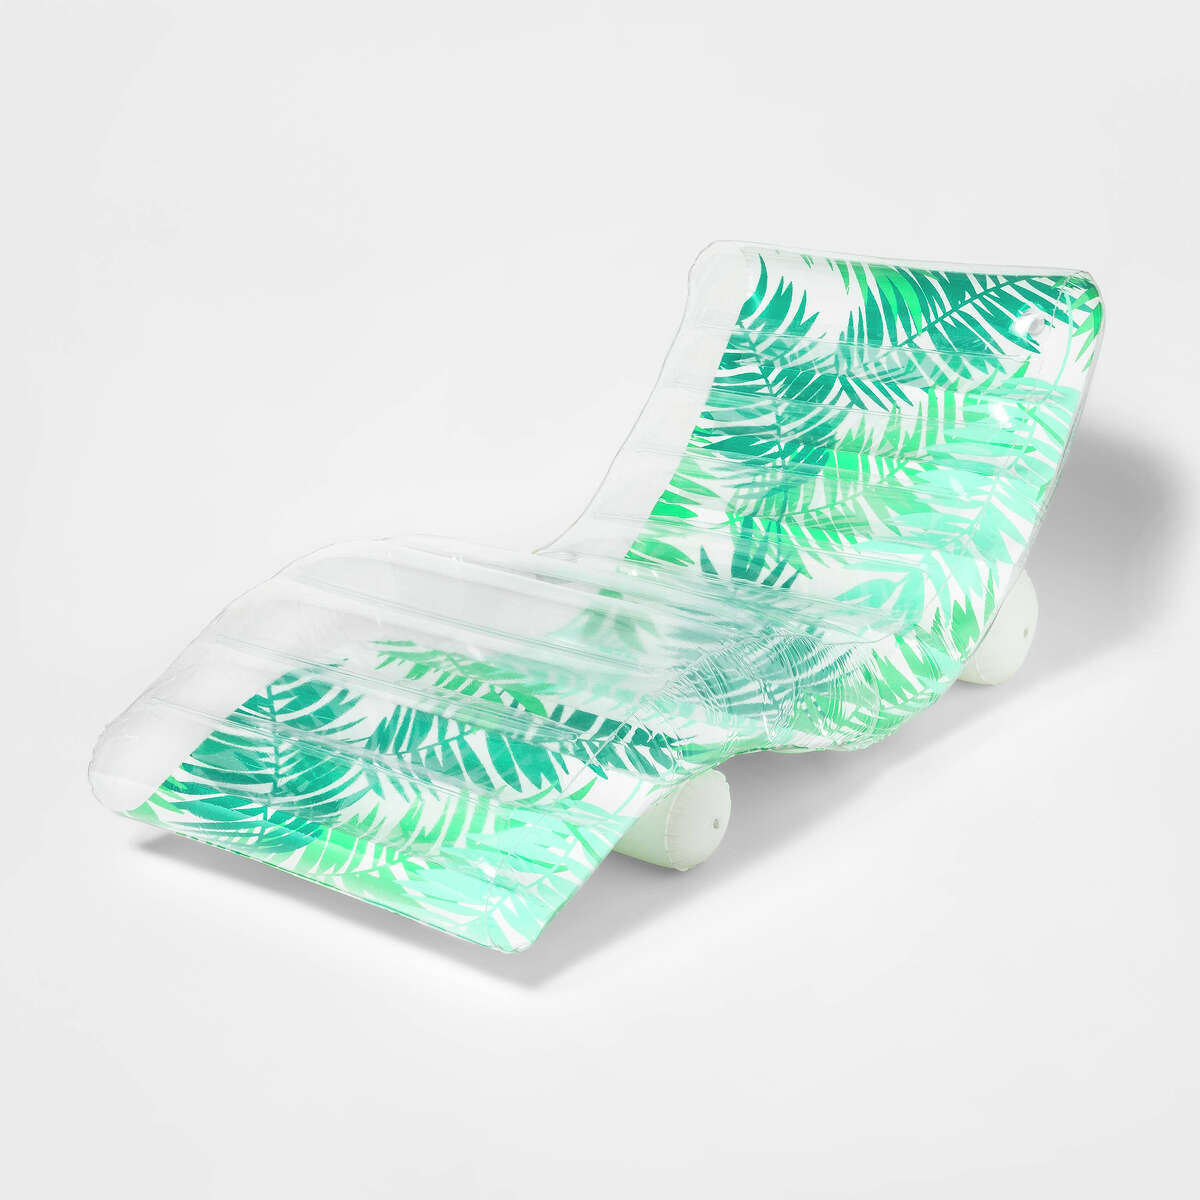 A curvy palm-printed pool lounger includes a drink holder.